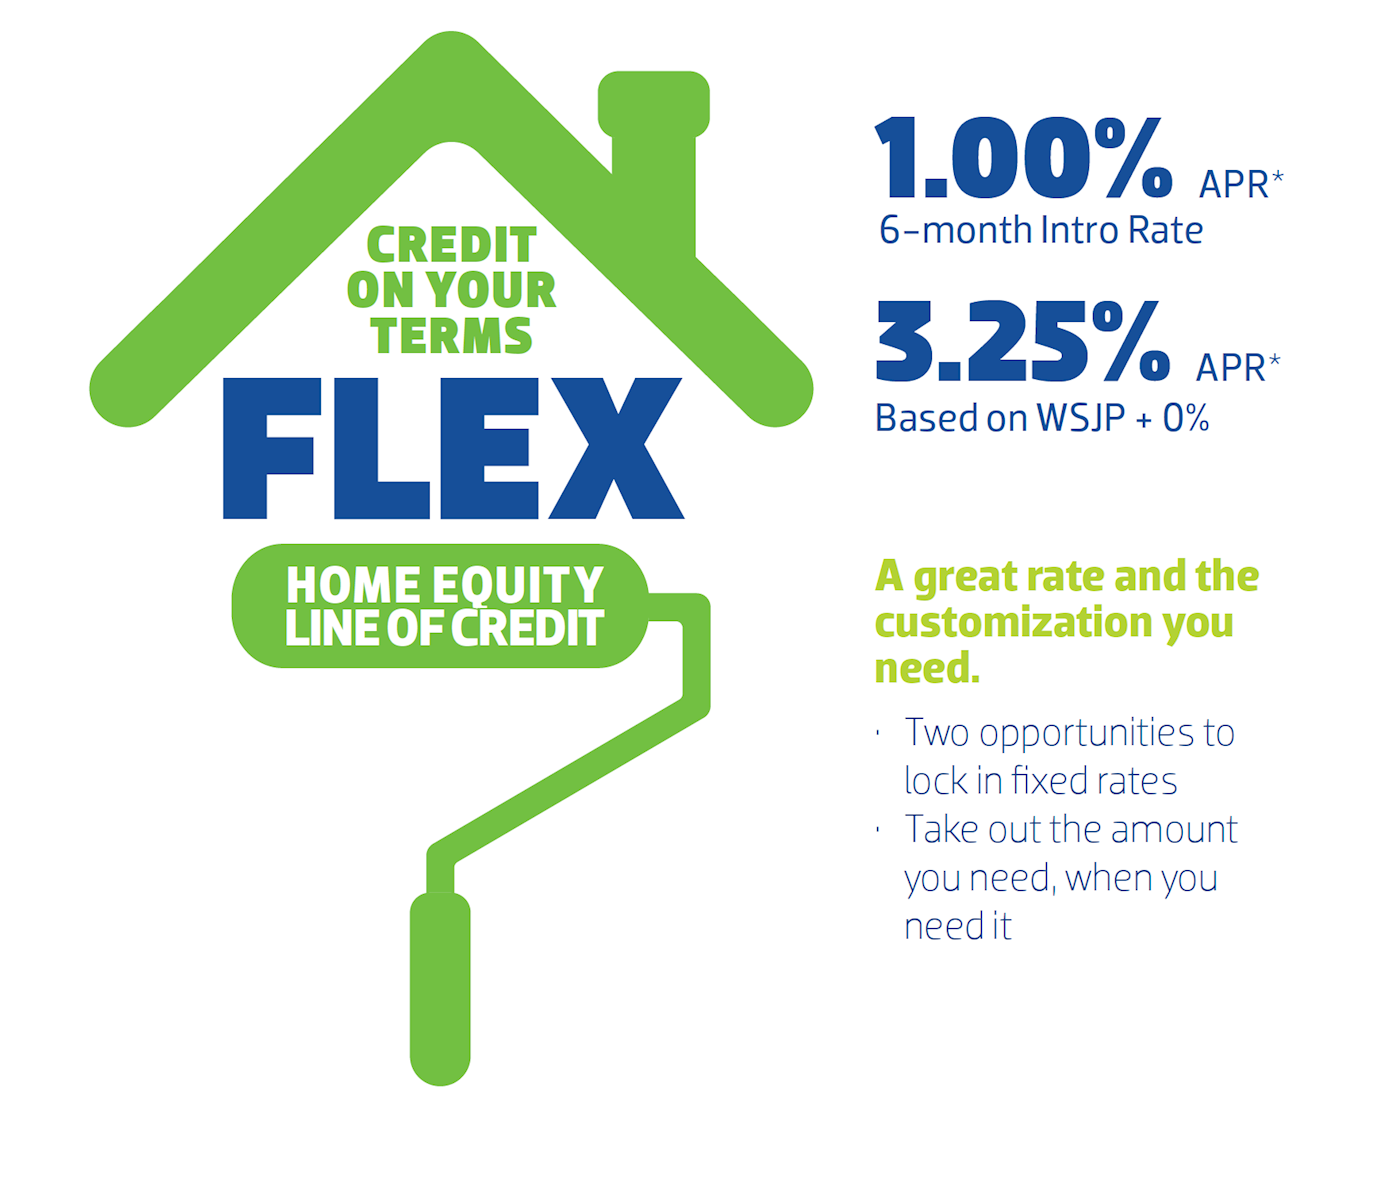 Credit on your terms FLEX Home equity line of credit